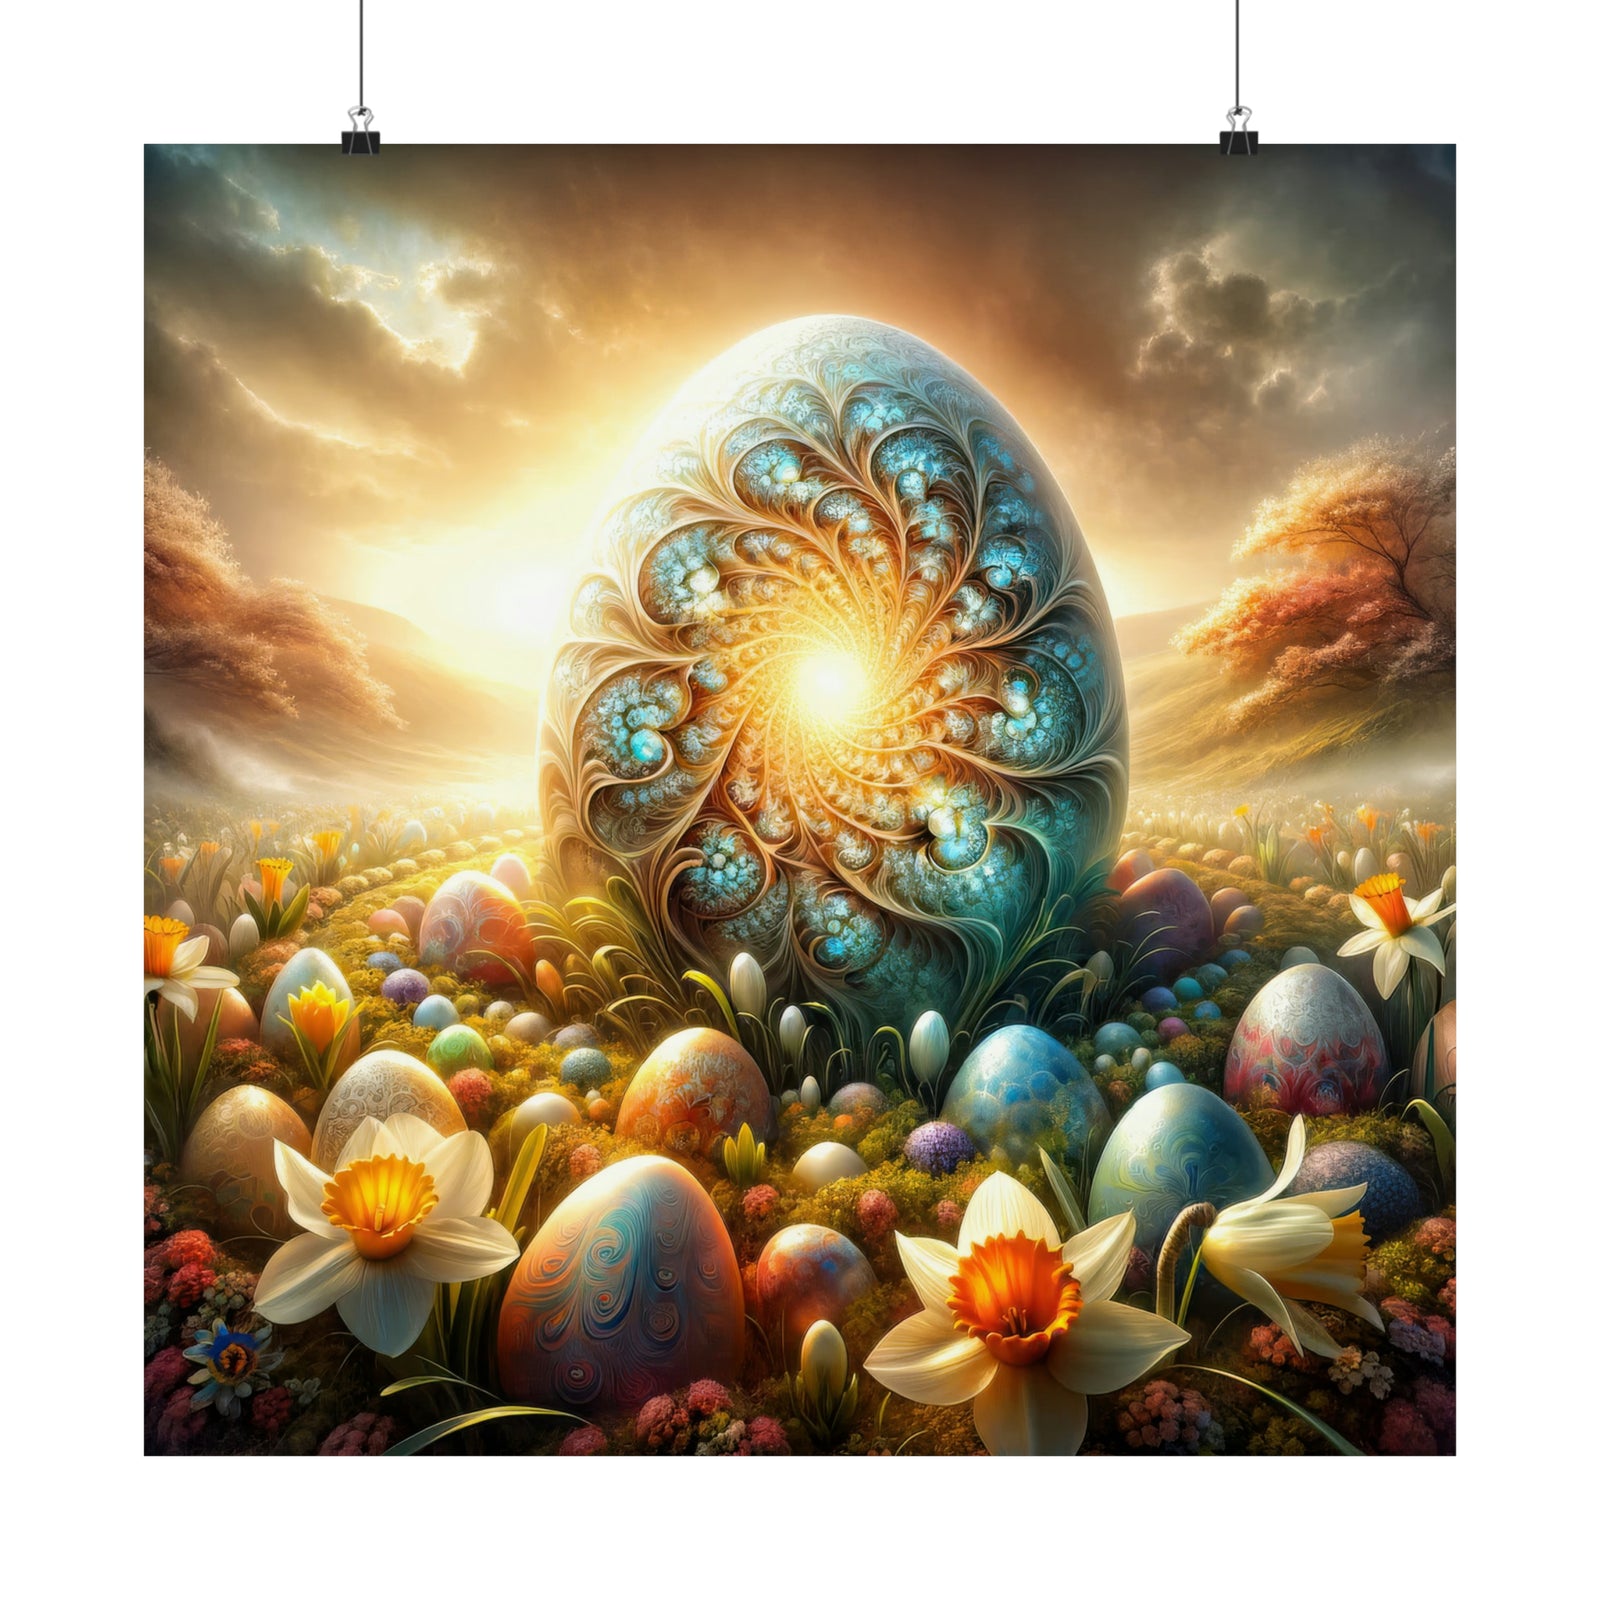 The Egg's Coronation by Daybreak Poster